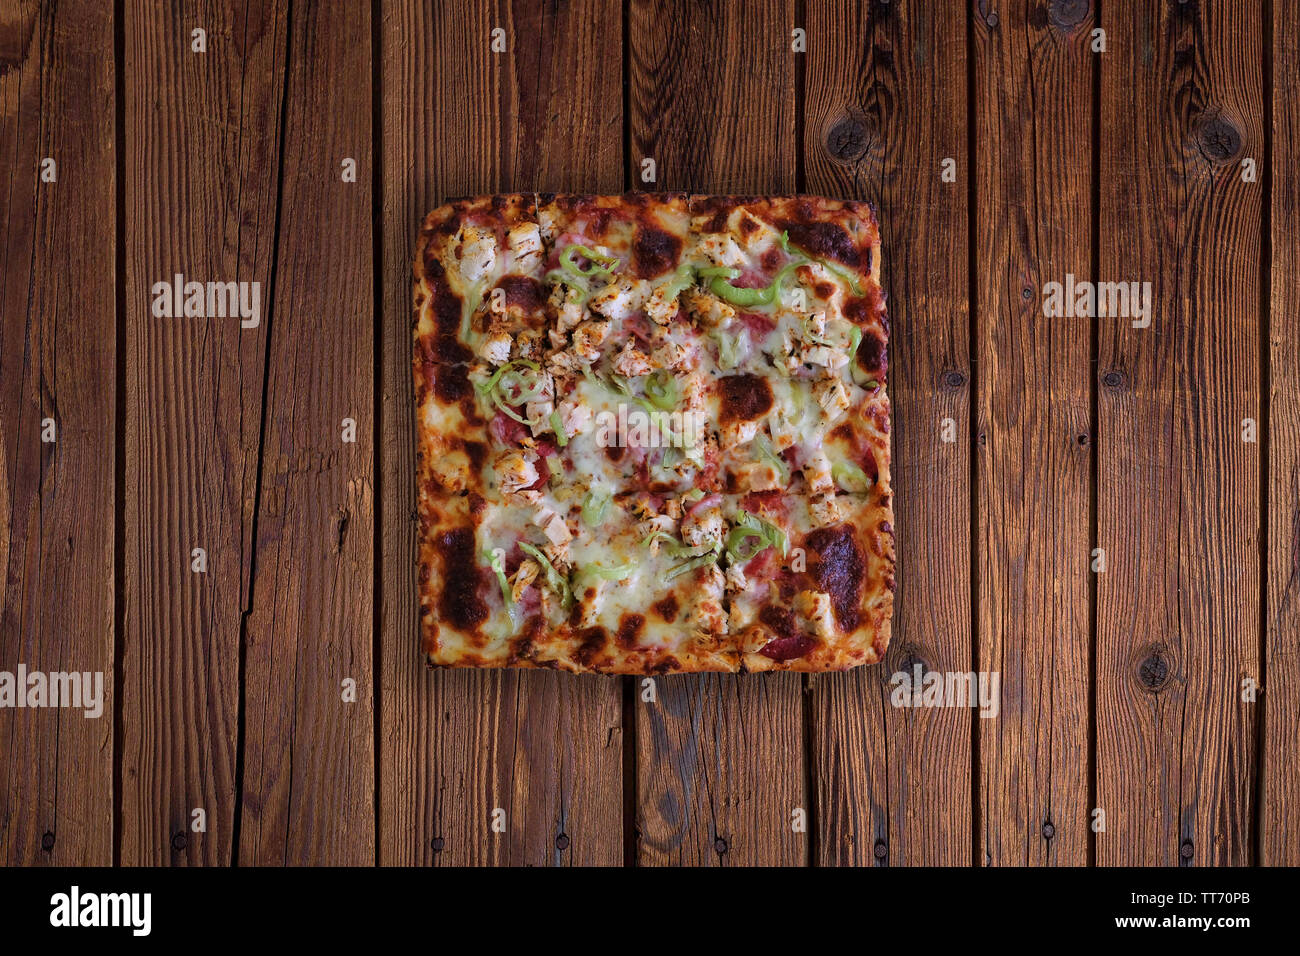 Square pizza on wooden table, top view of square sliced pizza Stock Photo